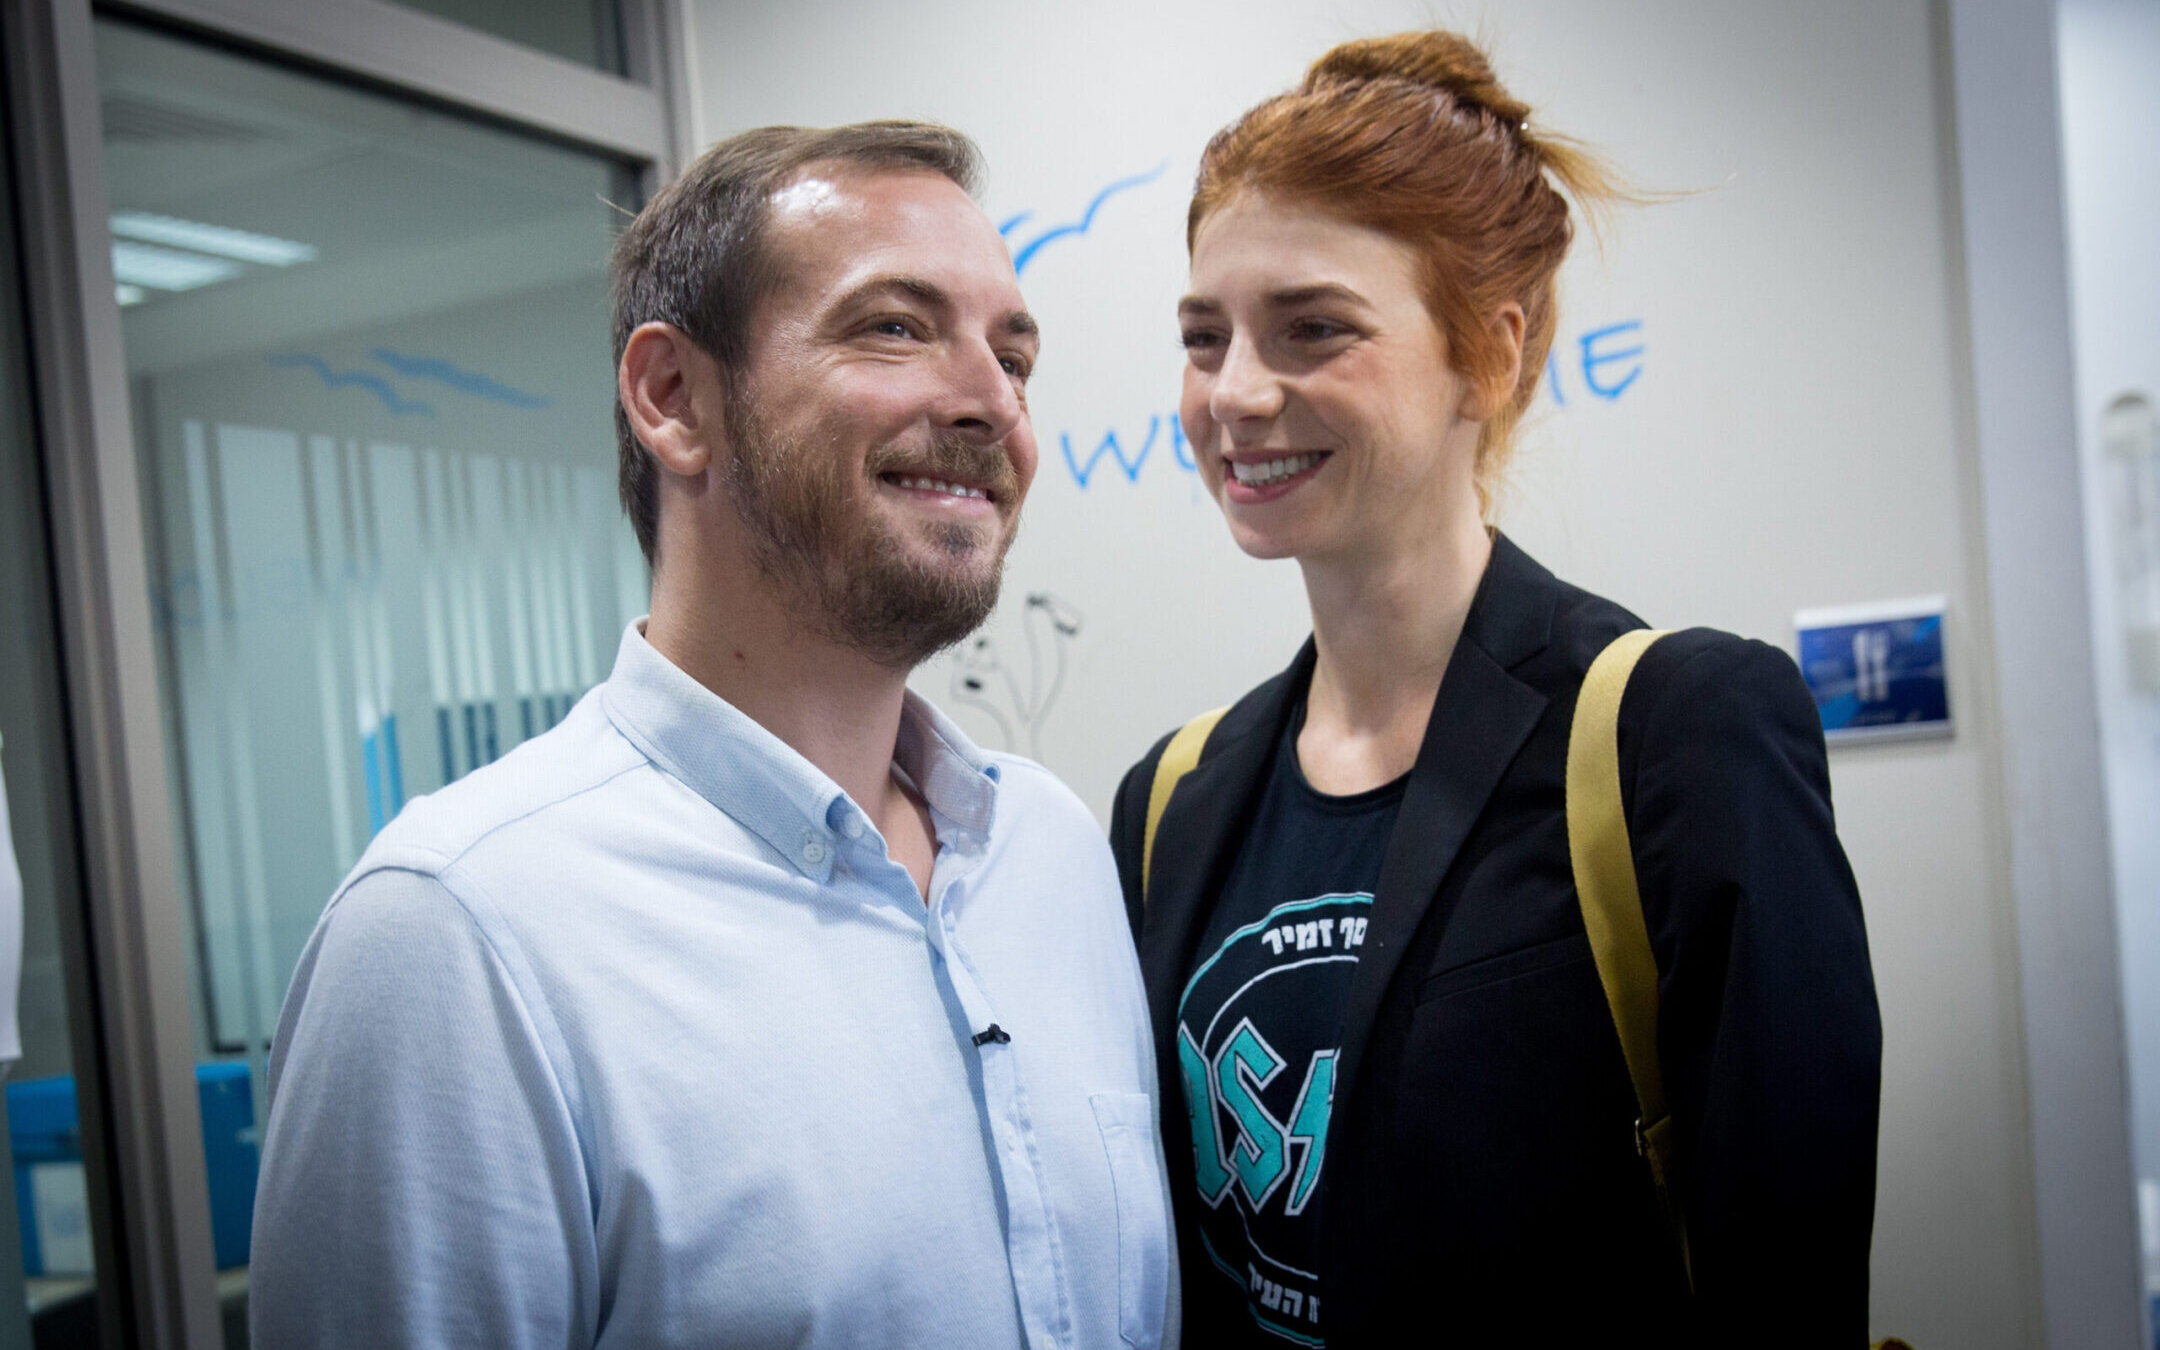 Asaf Zamir, then Tel Aviv mayoral candidate, and Maya Wertheimer arrive to cast their votes during elections in Tel Aviv, Oct. 30, 2018. At the time, the pair had been married in a Jewish ceremony but not a legal one. (Miriam Alster/Flash90)